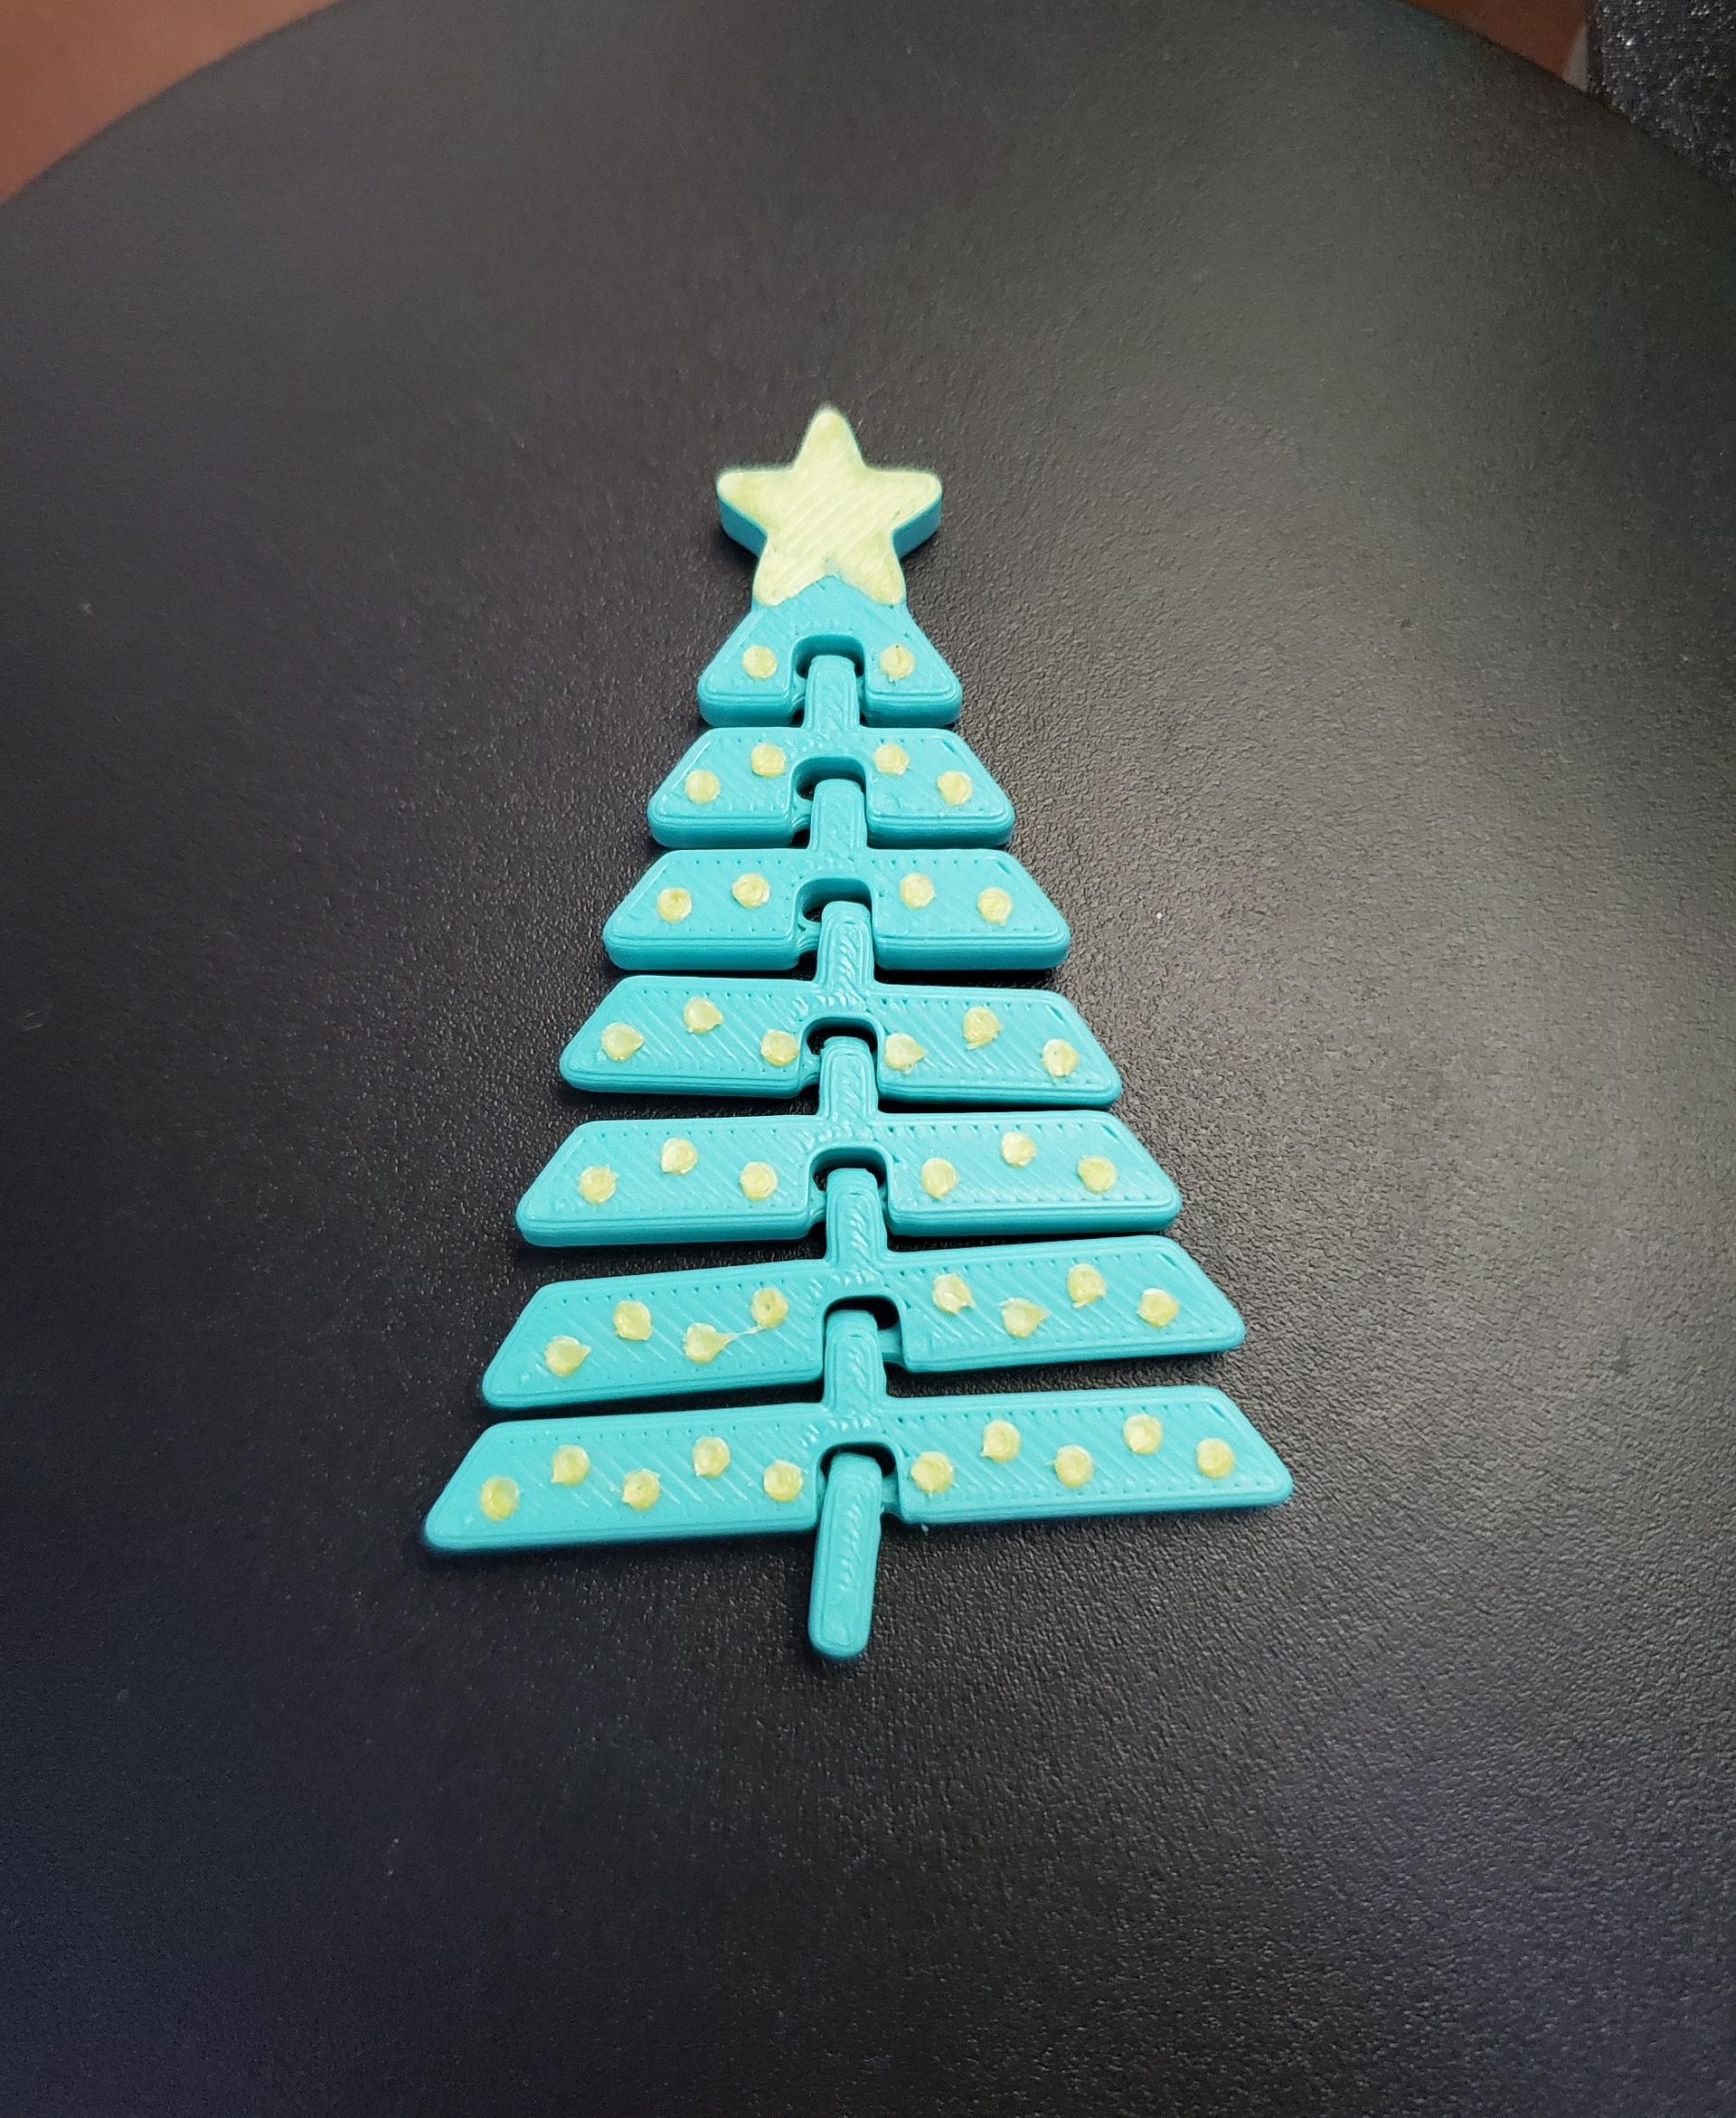 Articulated Christmas Tree with Star and Ornaments - Print in place fidget toys - 3mf - polymaker teal pla pro - 3d model